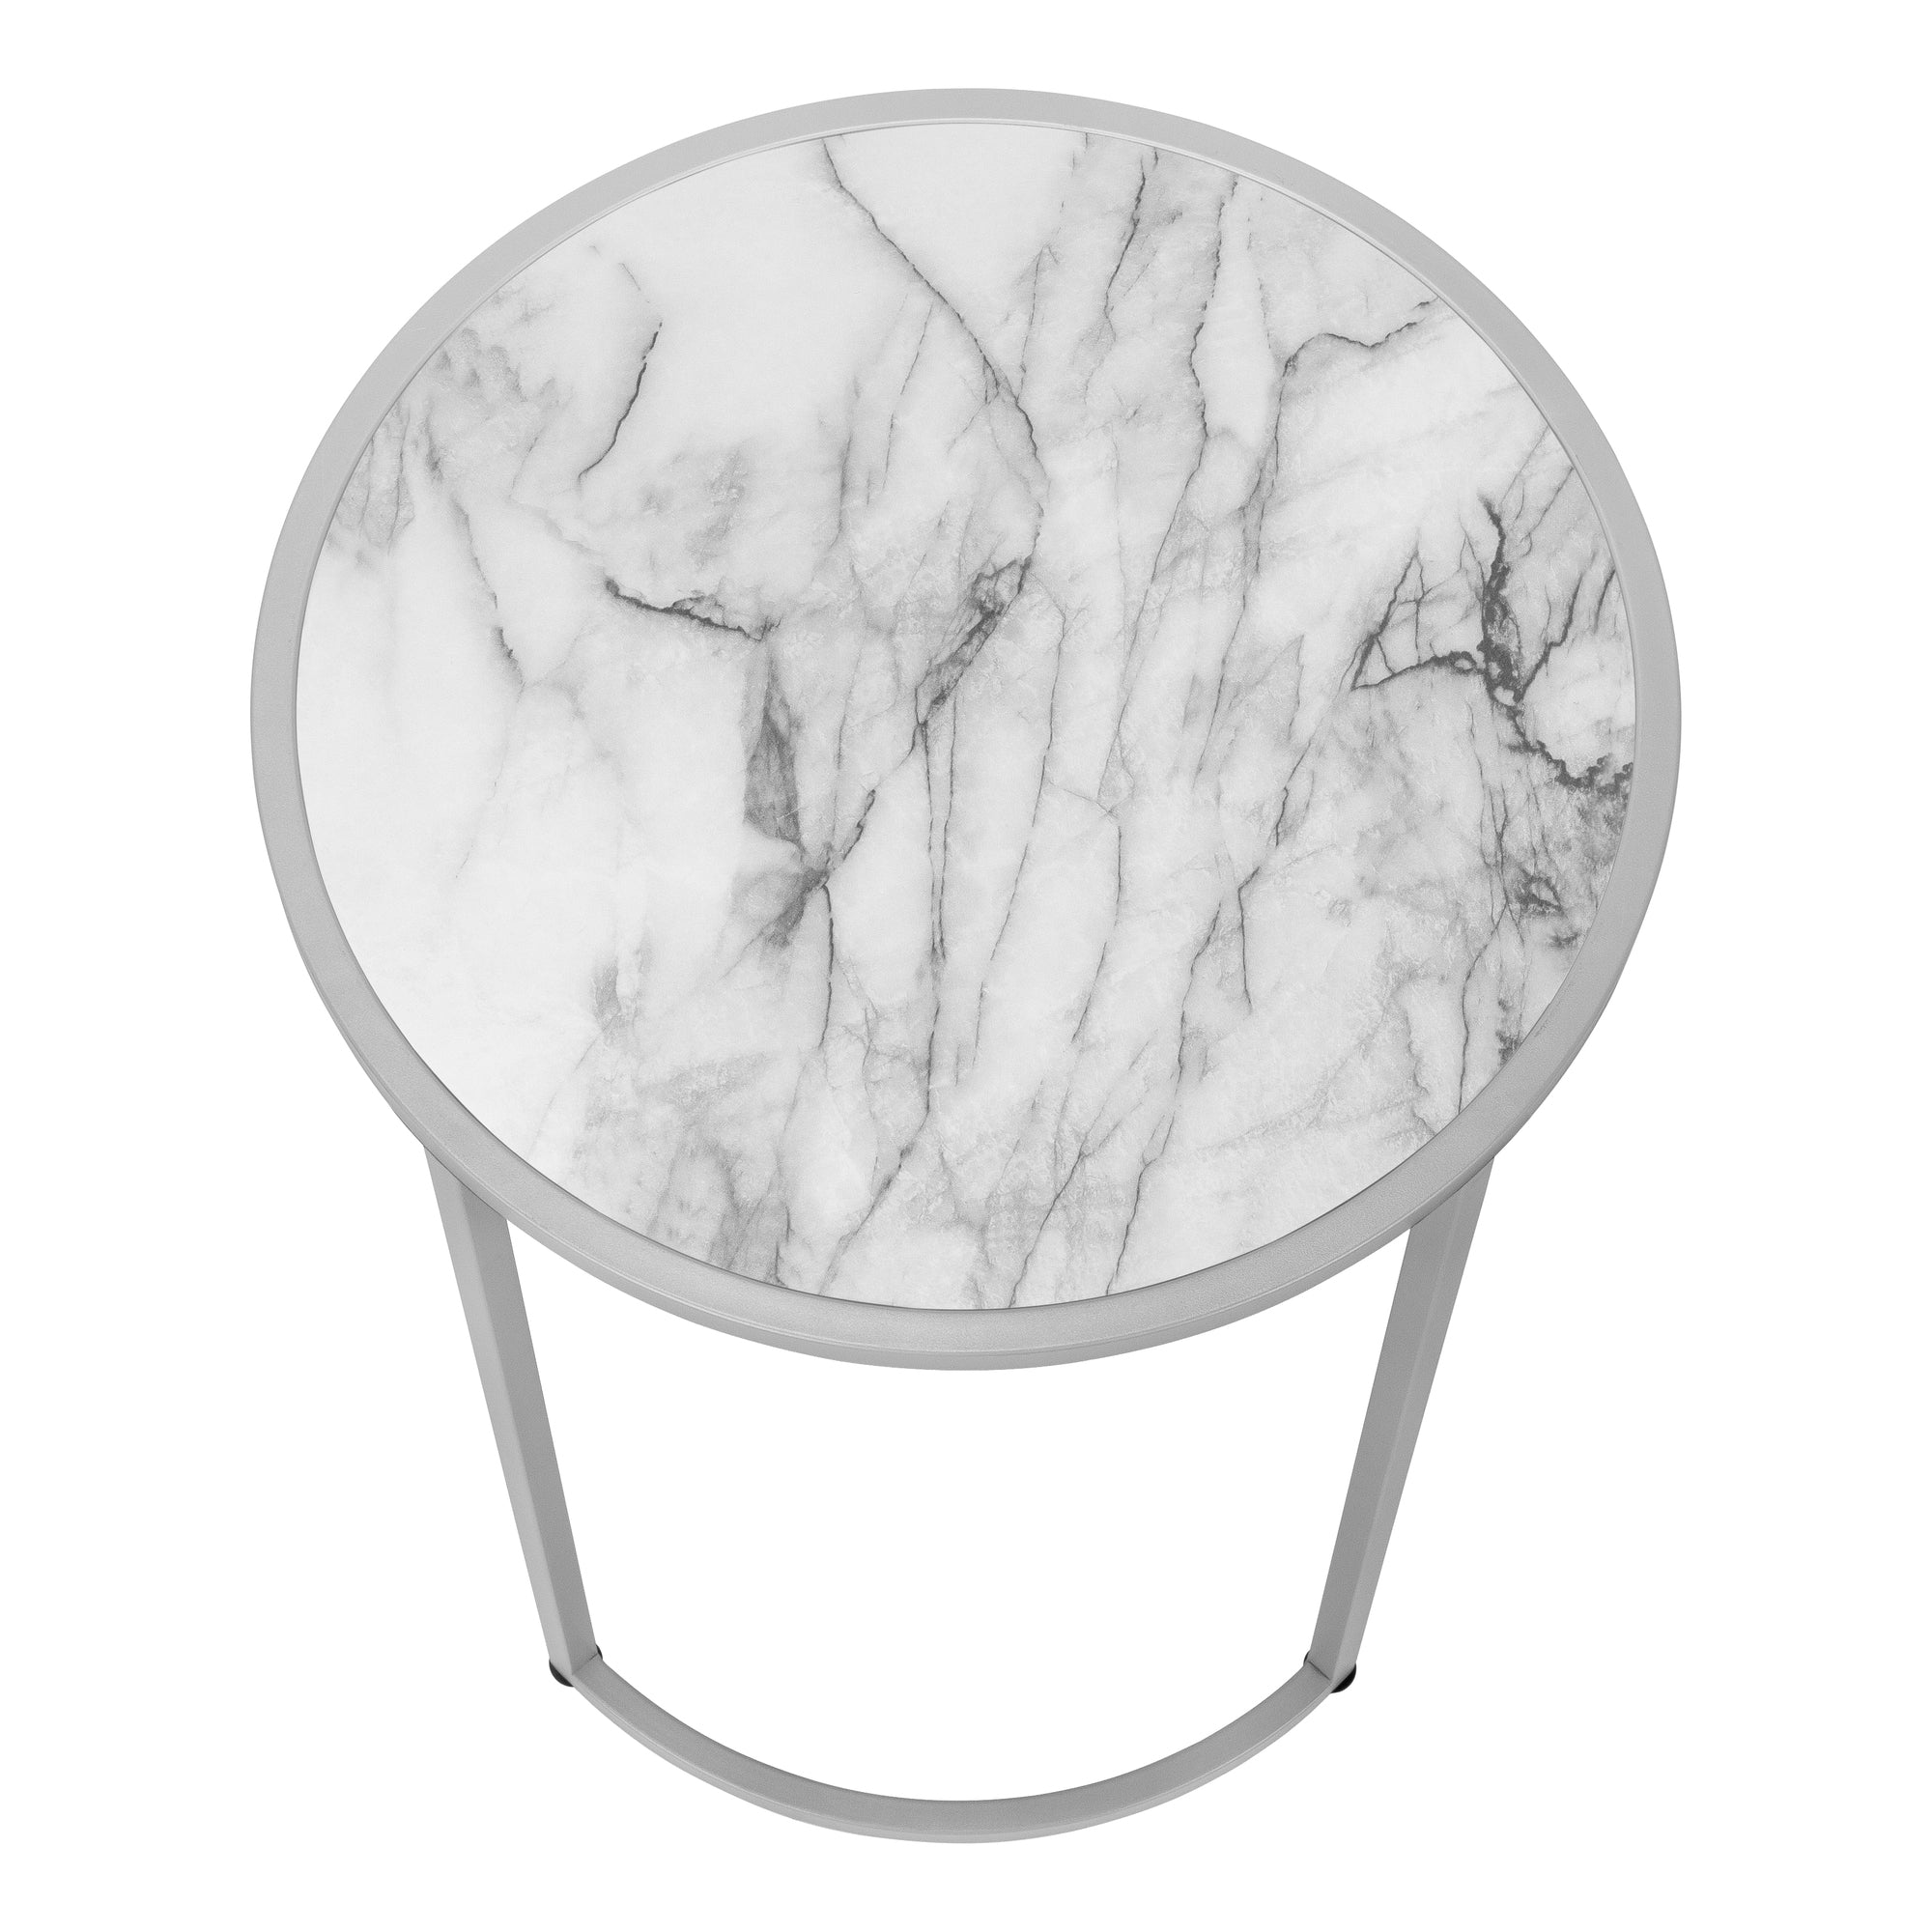 ACCENT TABLE - 24"H / WHITE MARBLE-LOOK / SILVER METAL